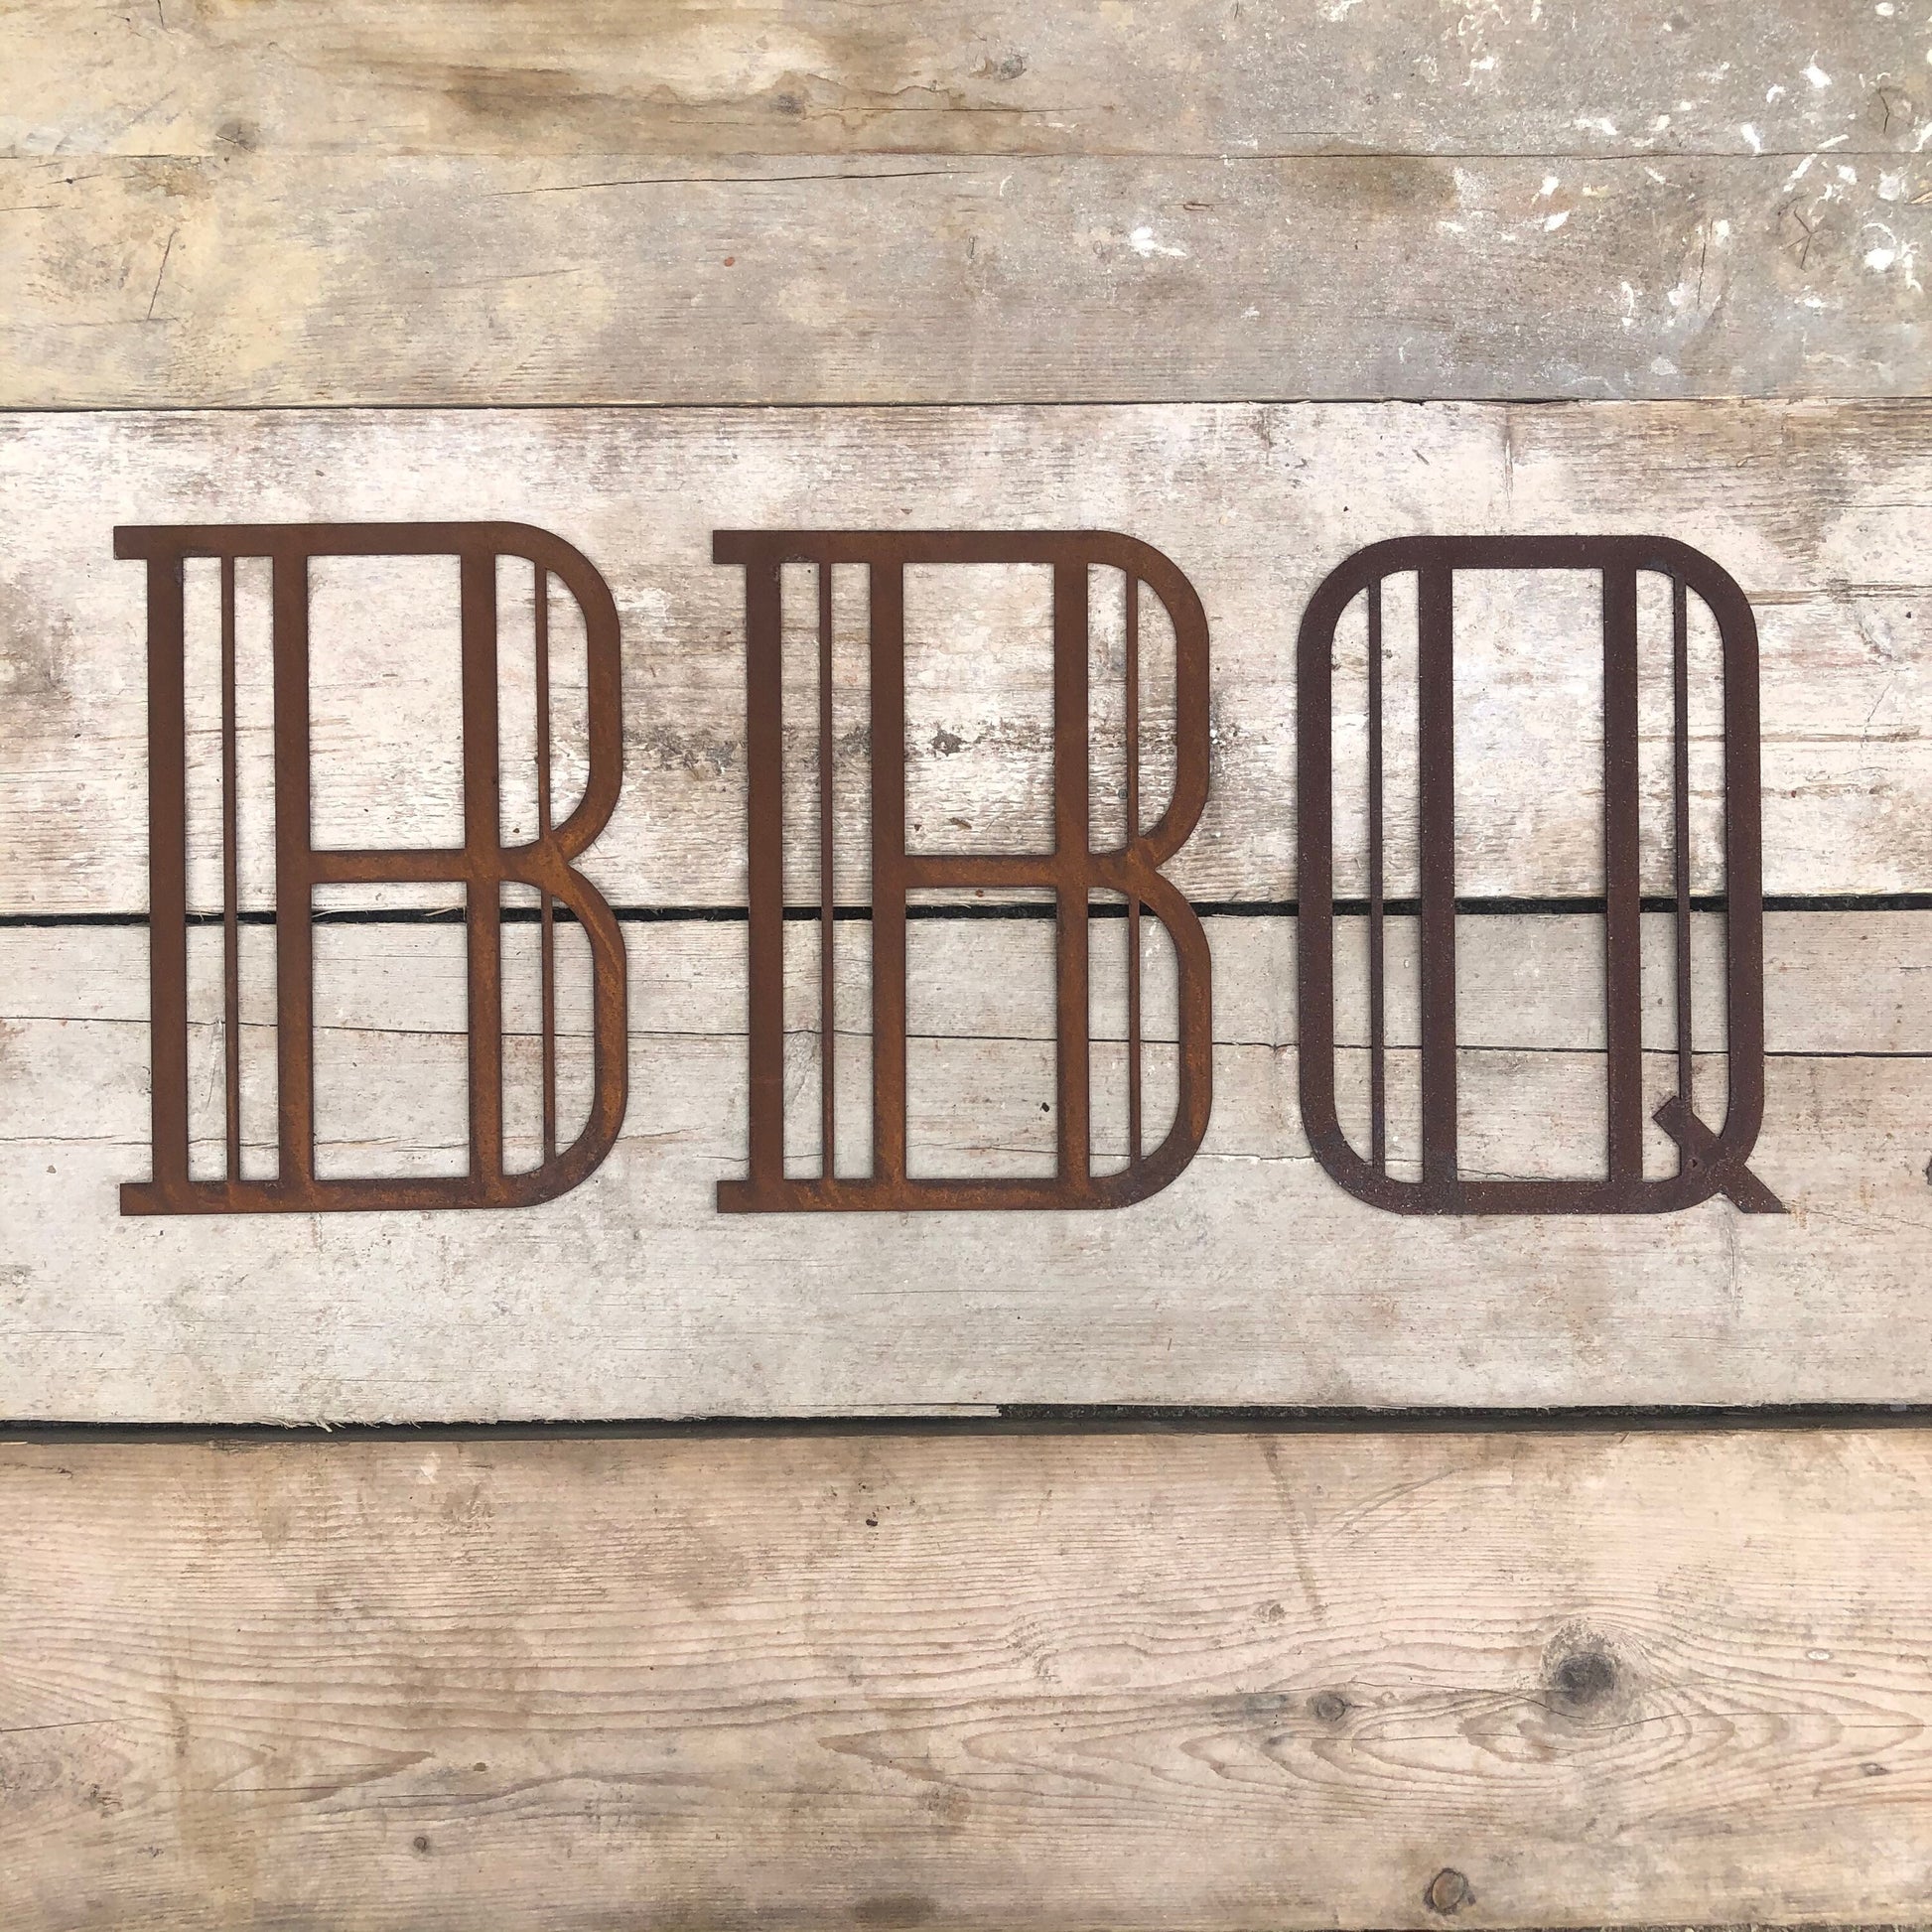 Rusty metal art deco style lettering spelling out BBQ